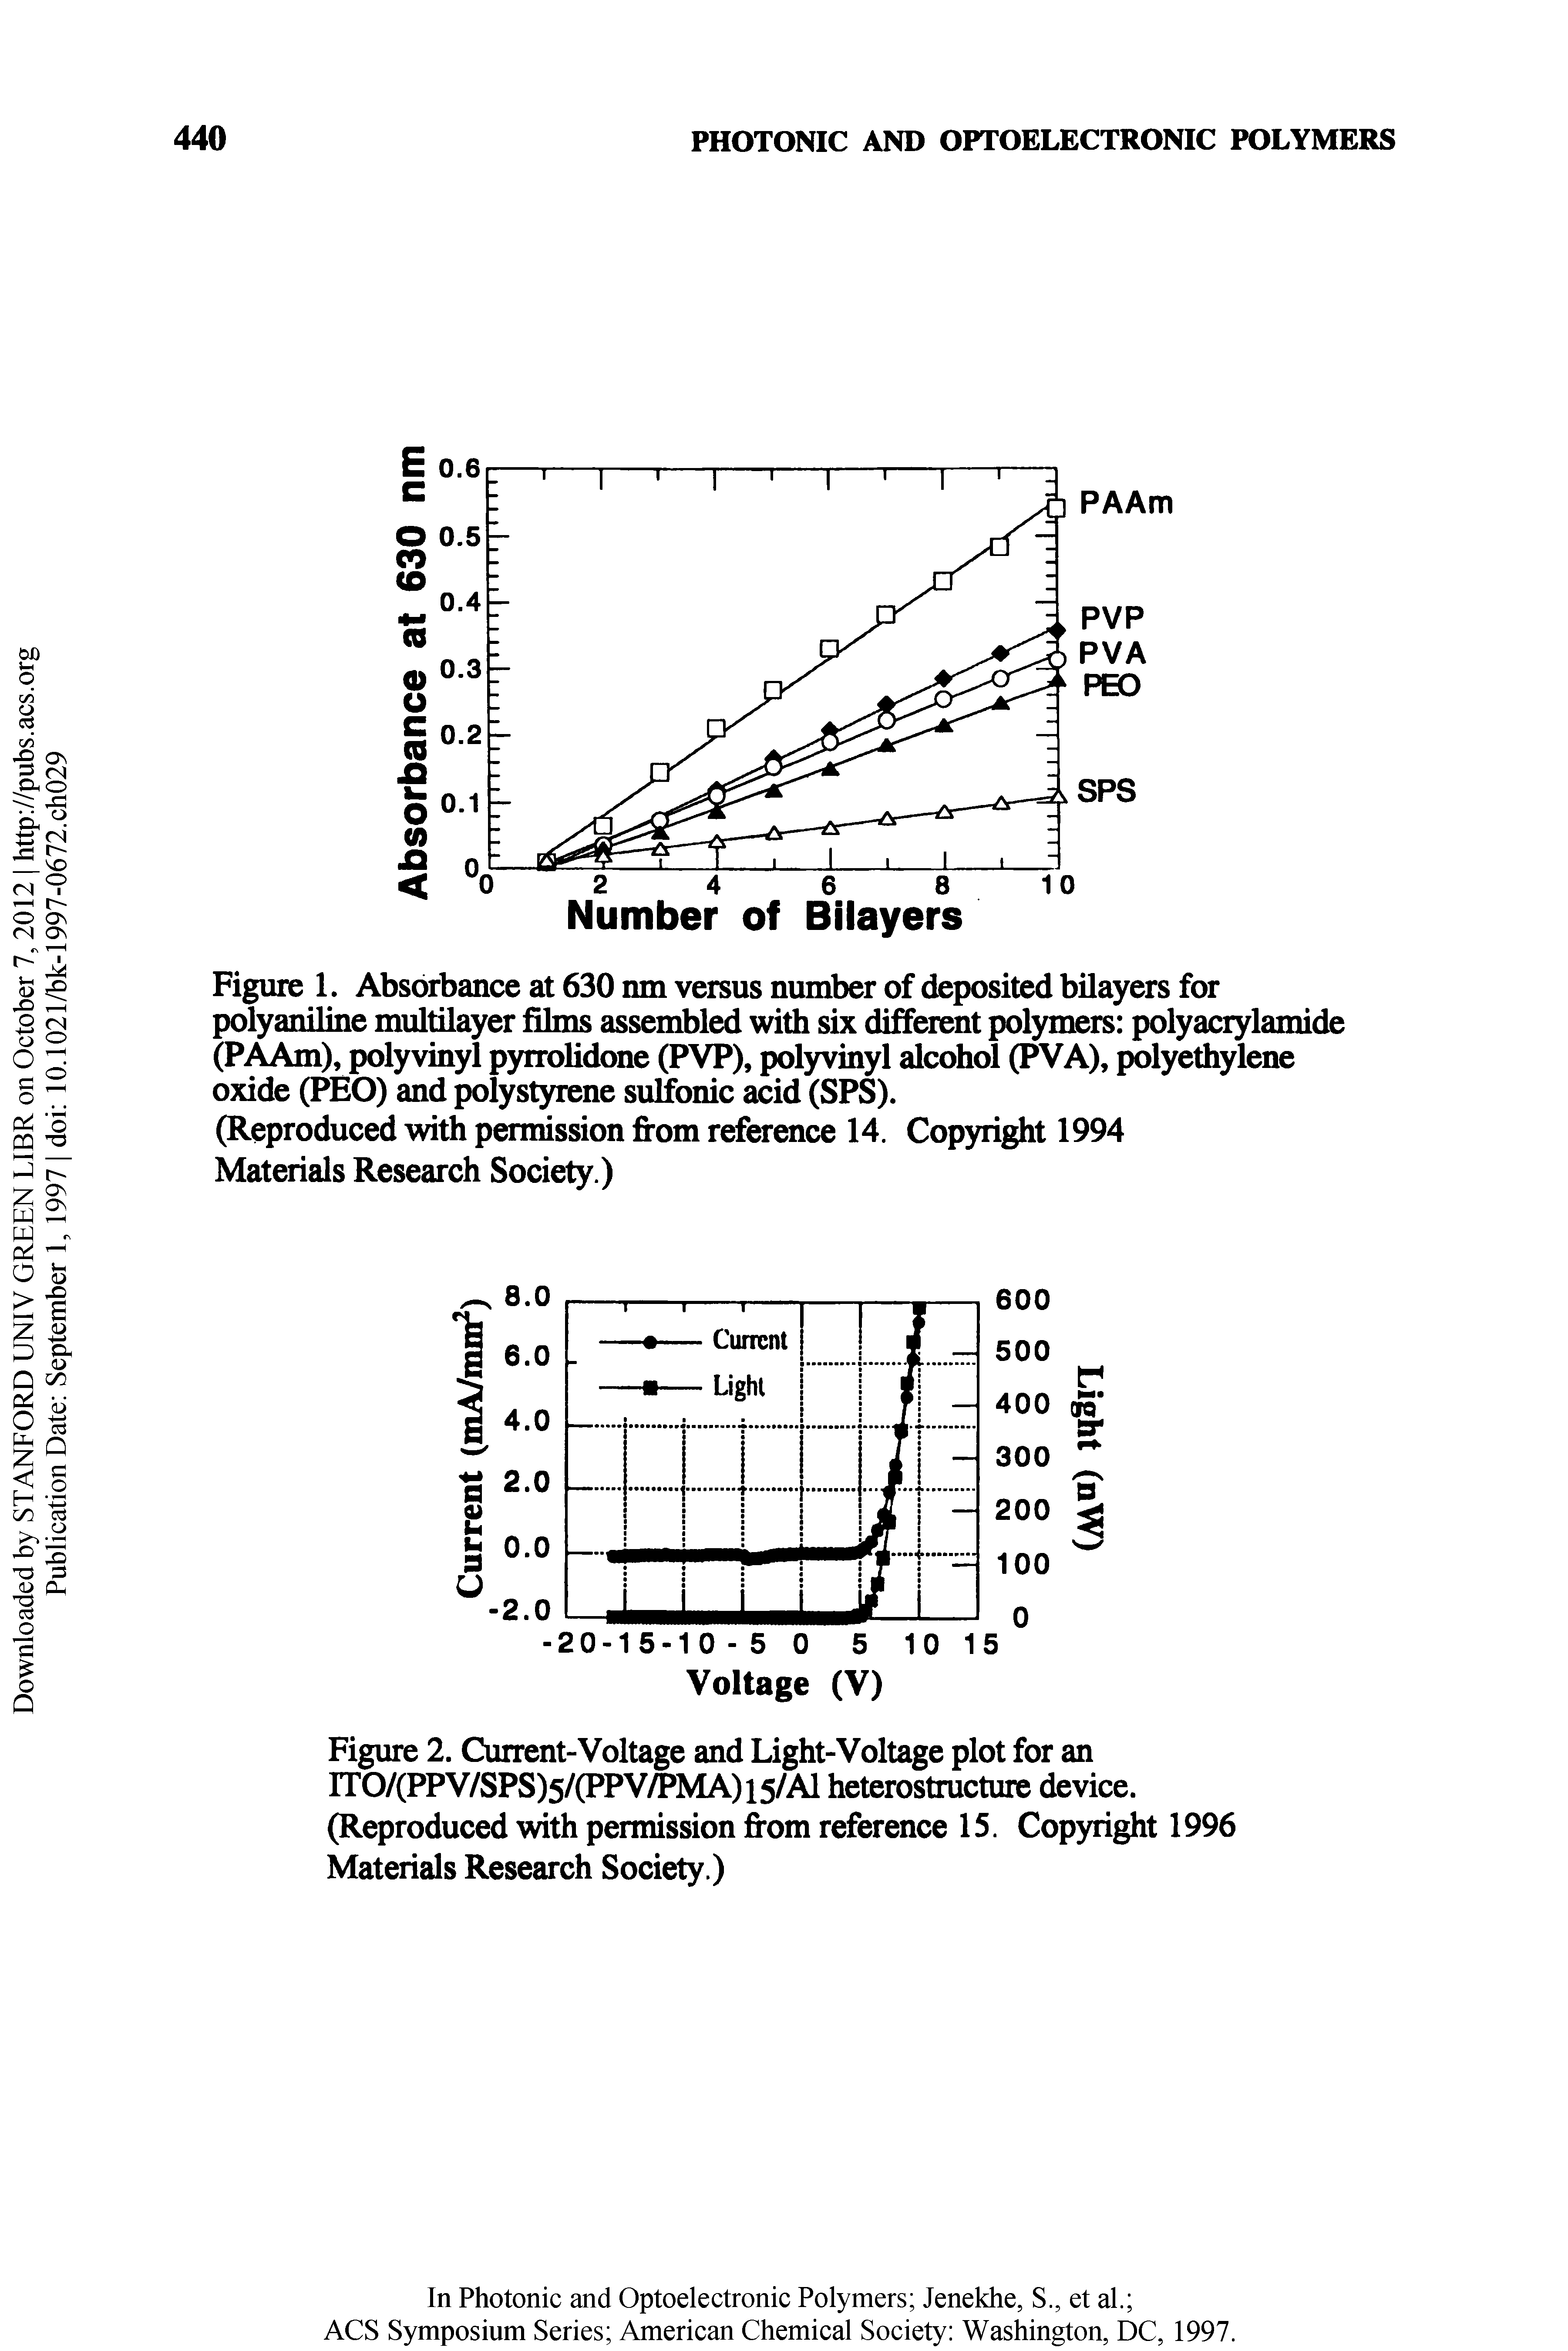 Figure 2. Current-Voltage and Light-Voltage plot for an rrO/(PPV/SPS)5/(PPV MA)i5/Al heterostructure device. (Reproduced with permission from reference 15. Copyright 1996 Materials Research Society.)...